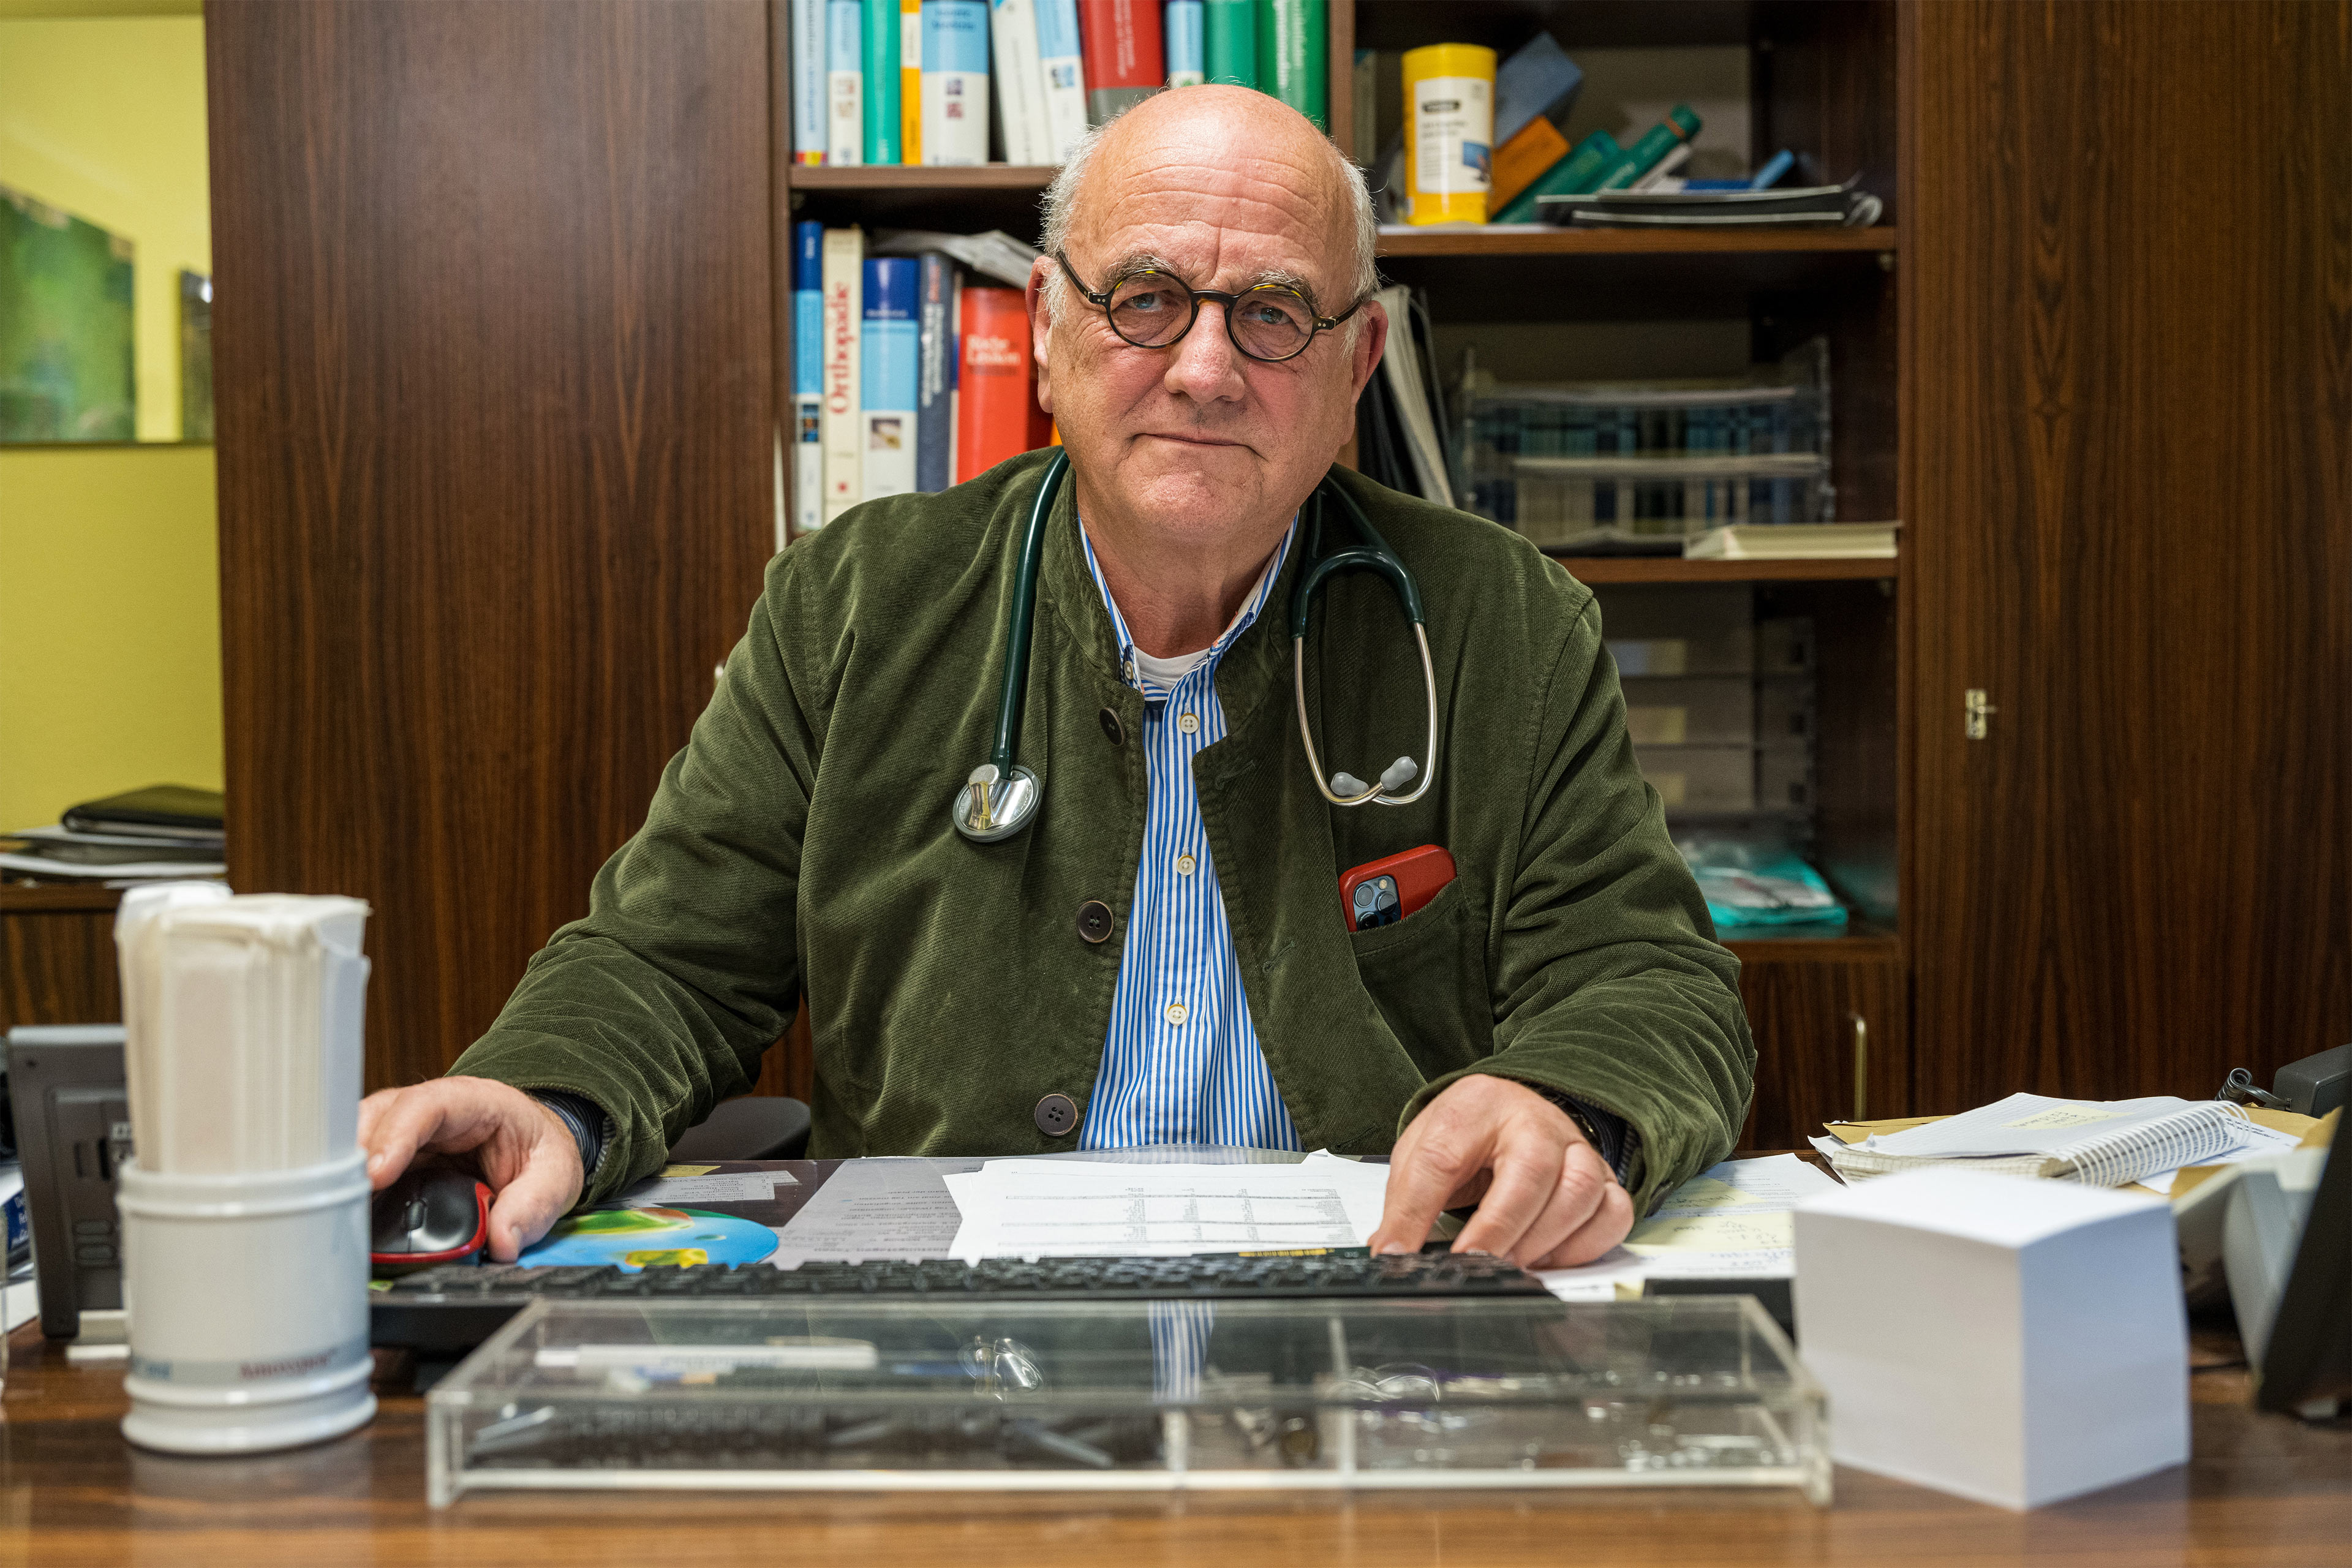 A photo shows Dr. Eckart Rolshoven sitting at a desk for a picture.